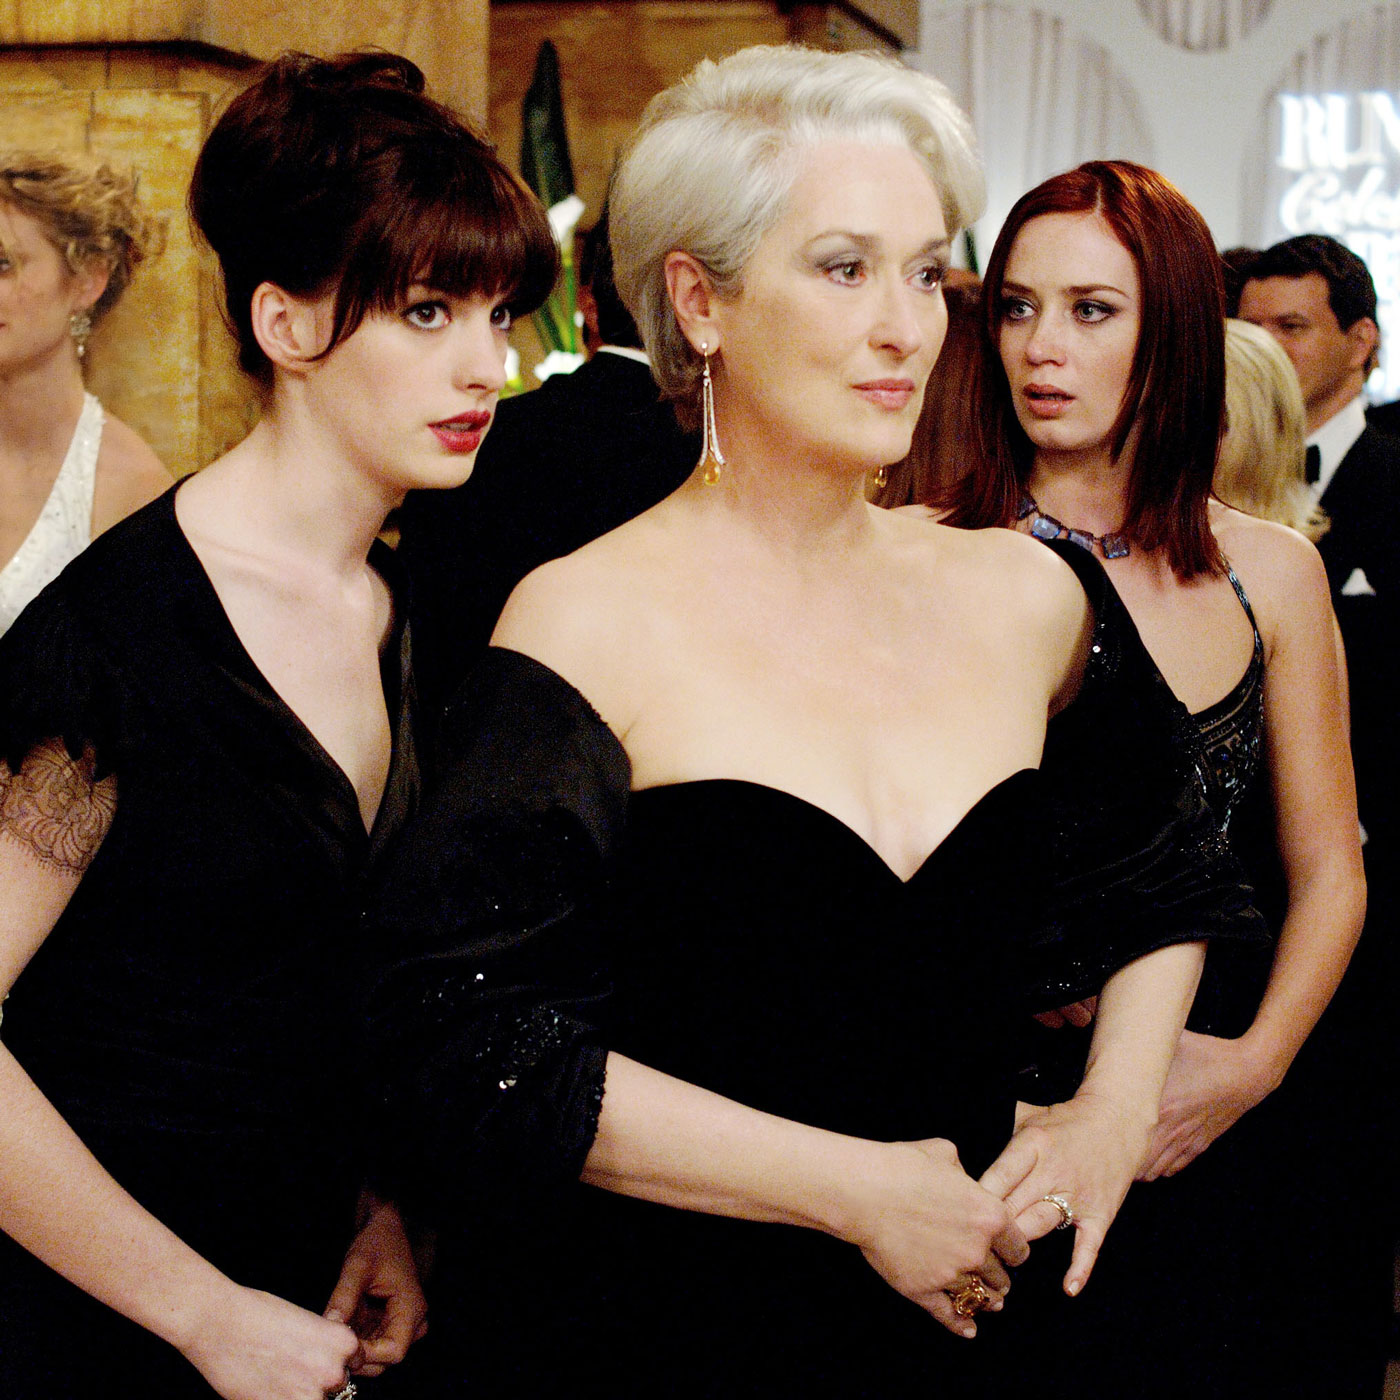 The Devil Wears Prada Is Finally Getting a Sequel—Here's Everything We Know